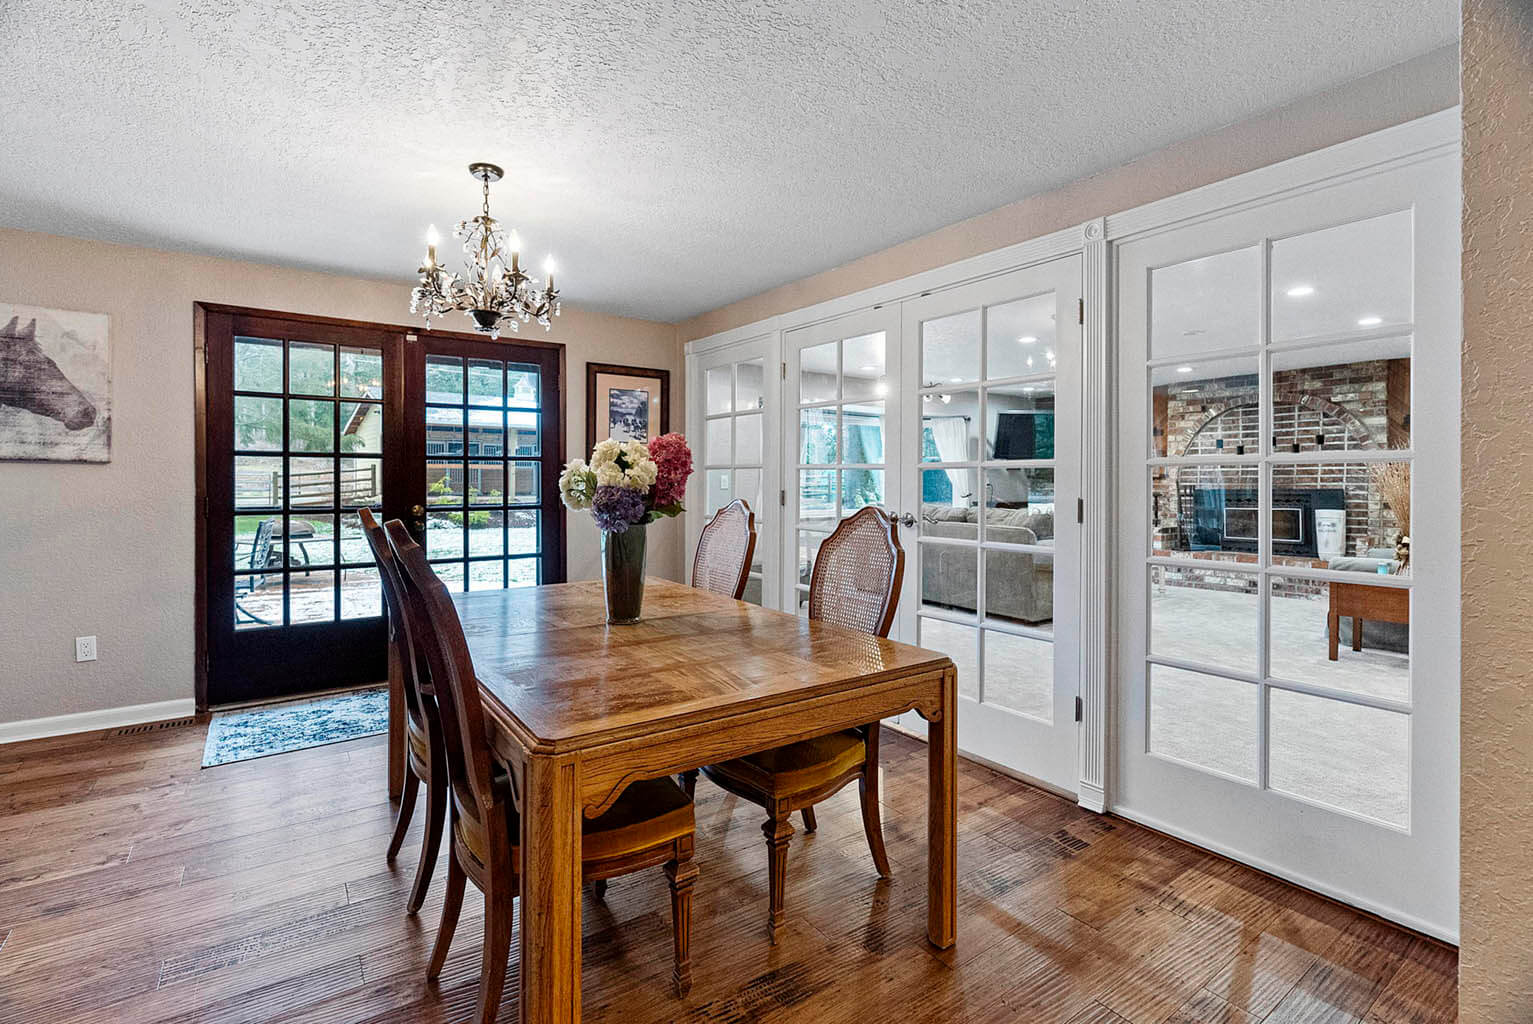 Spacious dining room with hand-scraped floors and French doors to back deck